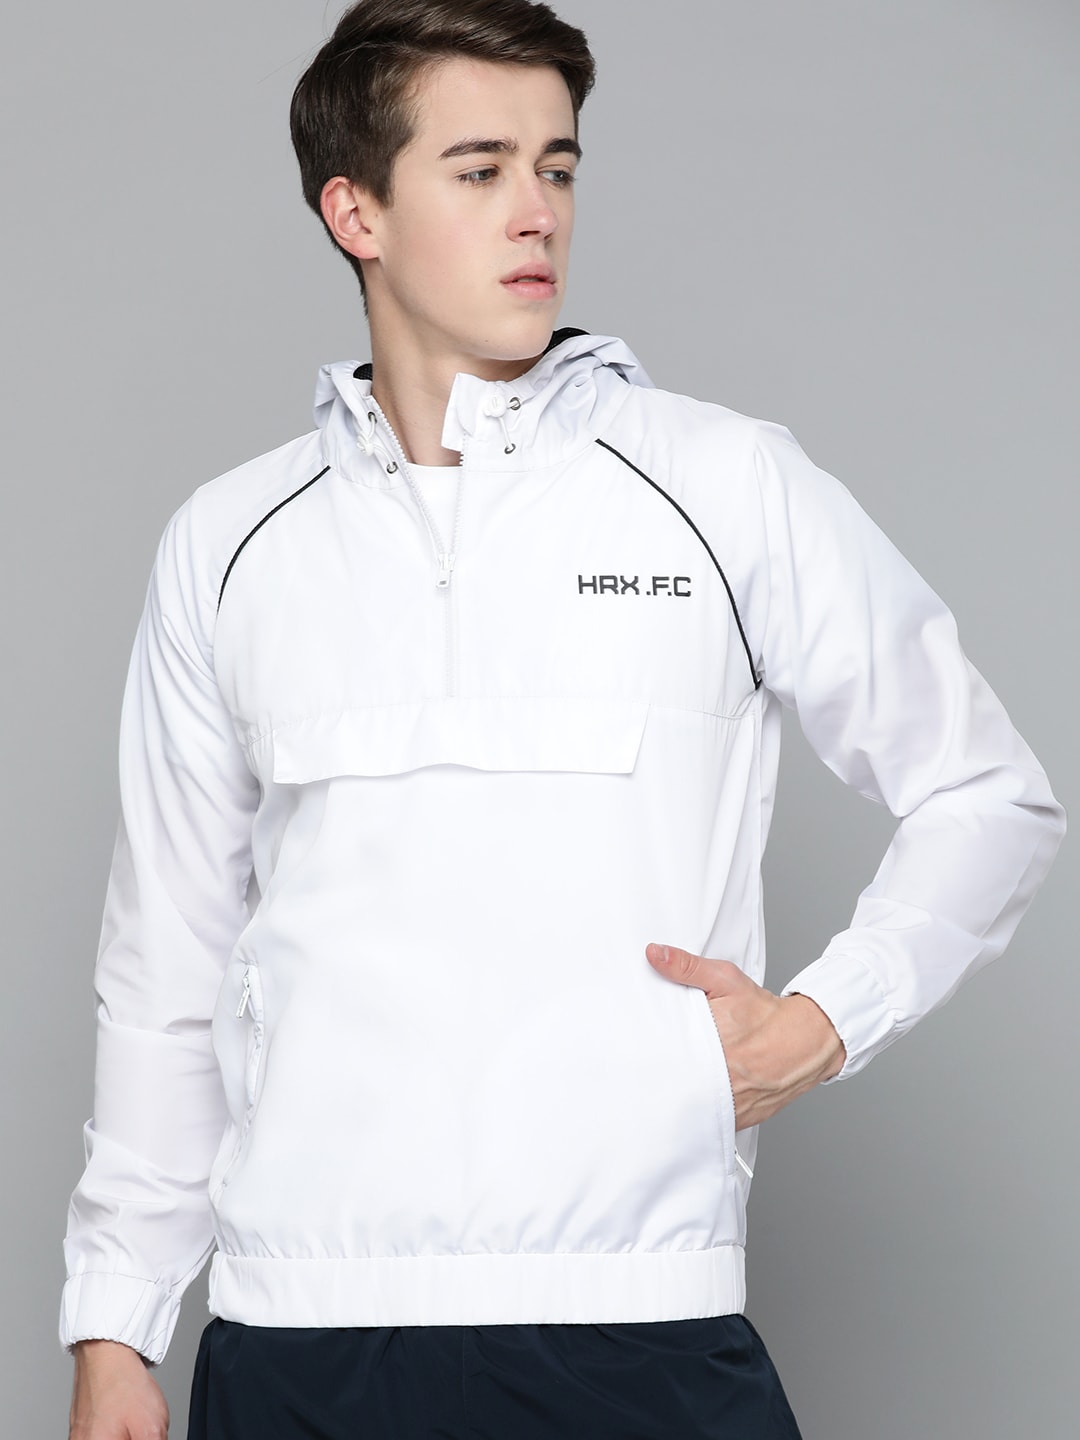 HRX Hooded & Fleece jackets for Men sale - discounted price | FASHIOLA INDIA-calidas.vn